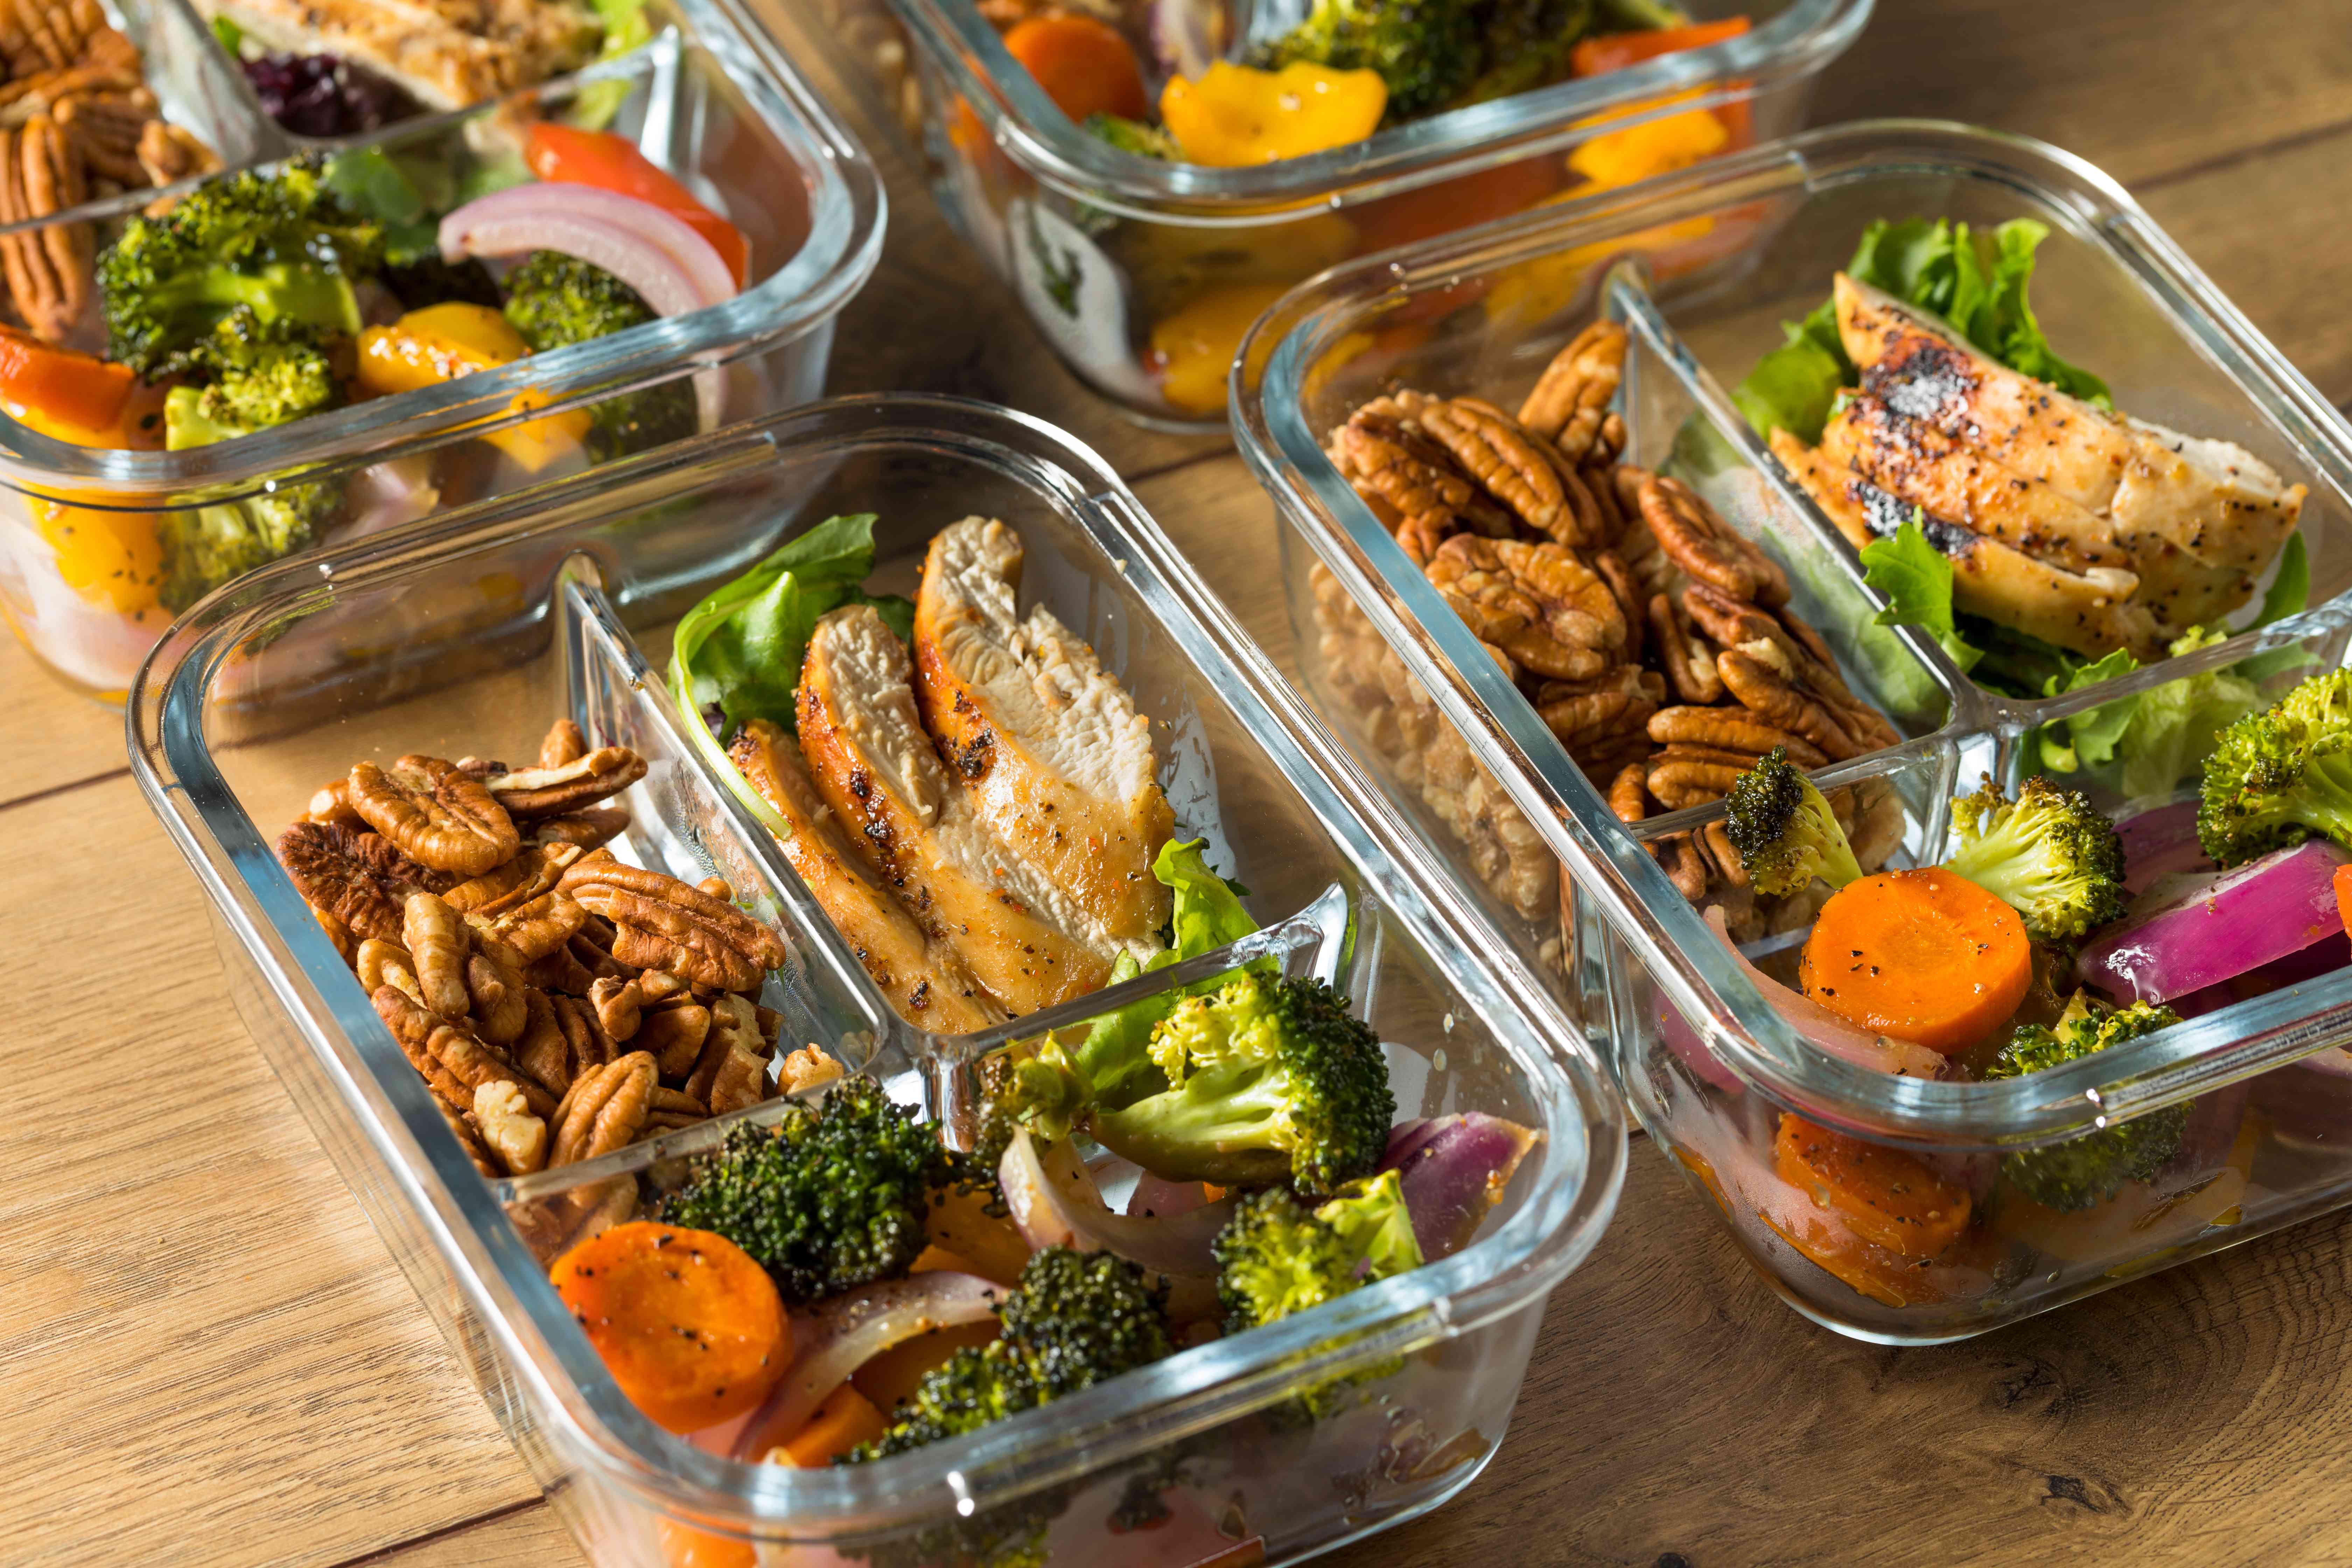 Healthy Meal Prep Ideas for the Week: What to Make and When